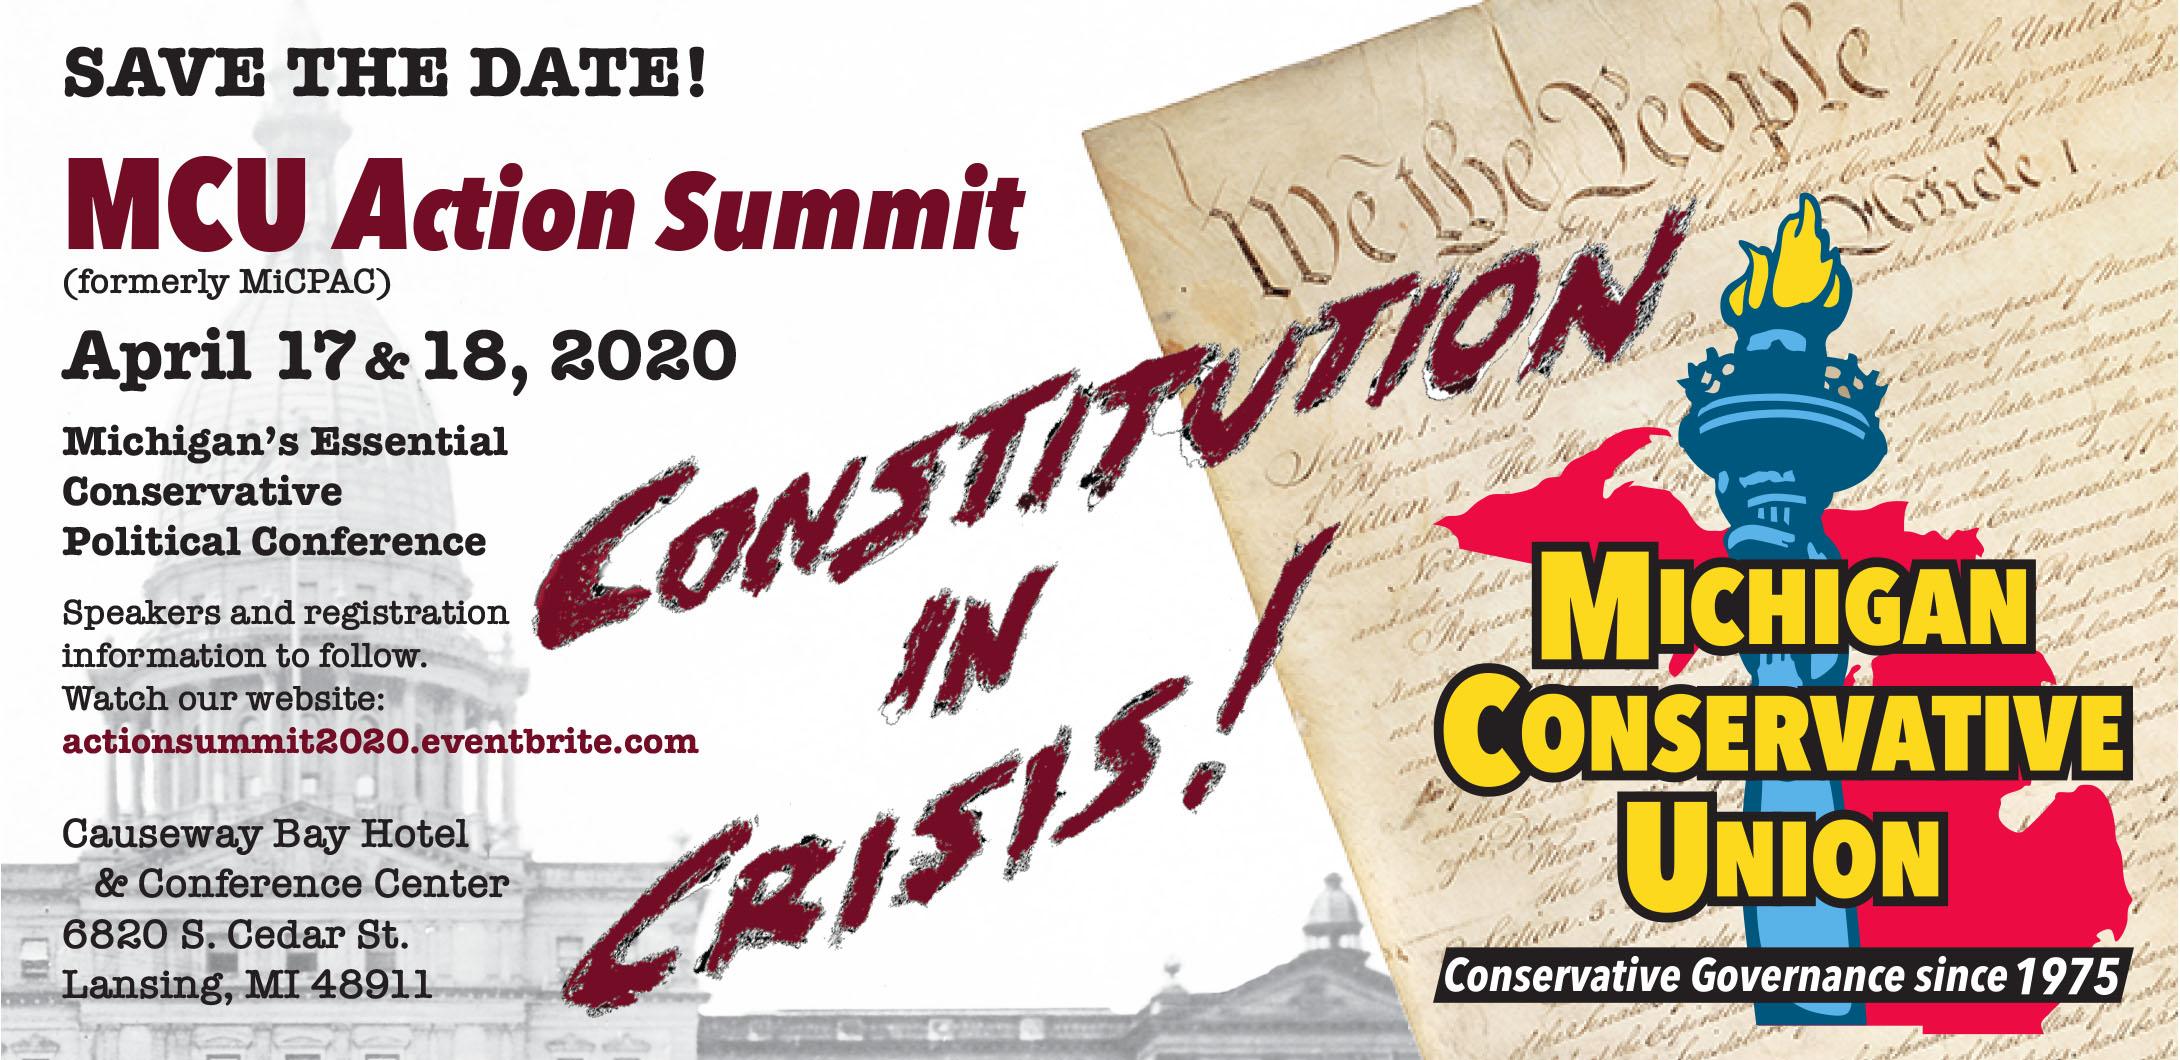 Michigan Conservative Union Action Summit (formerly MiCPAC)